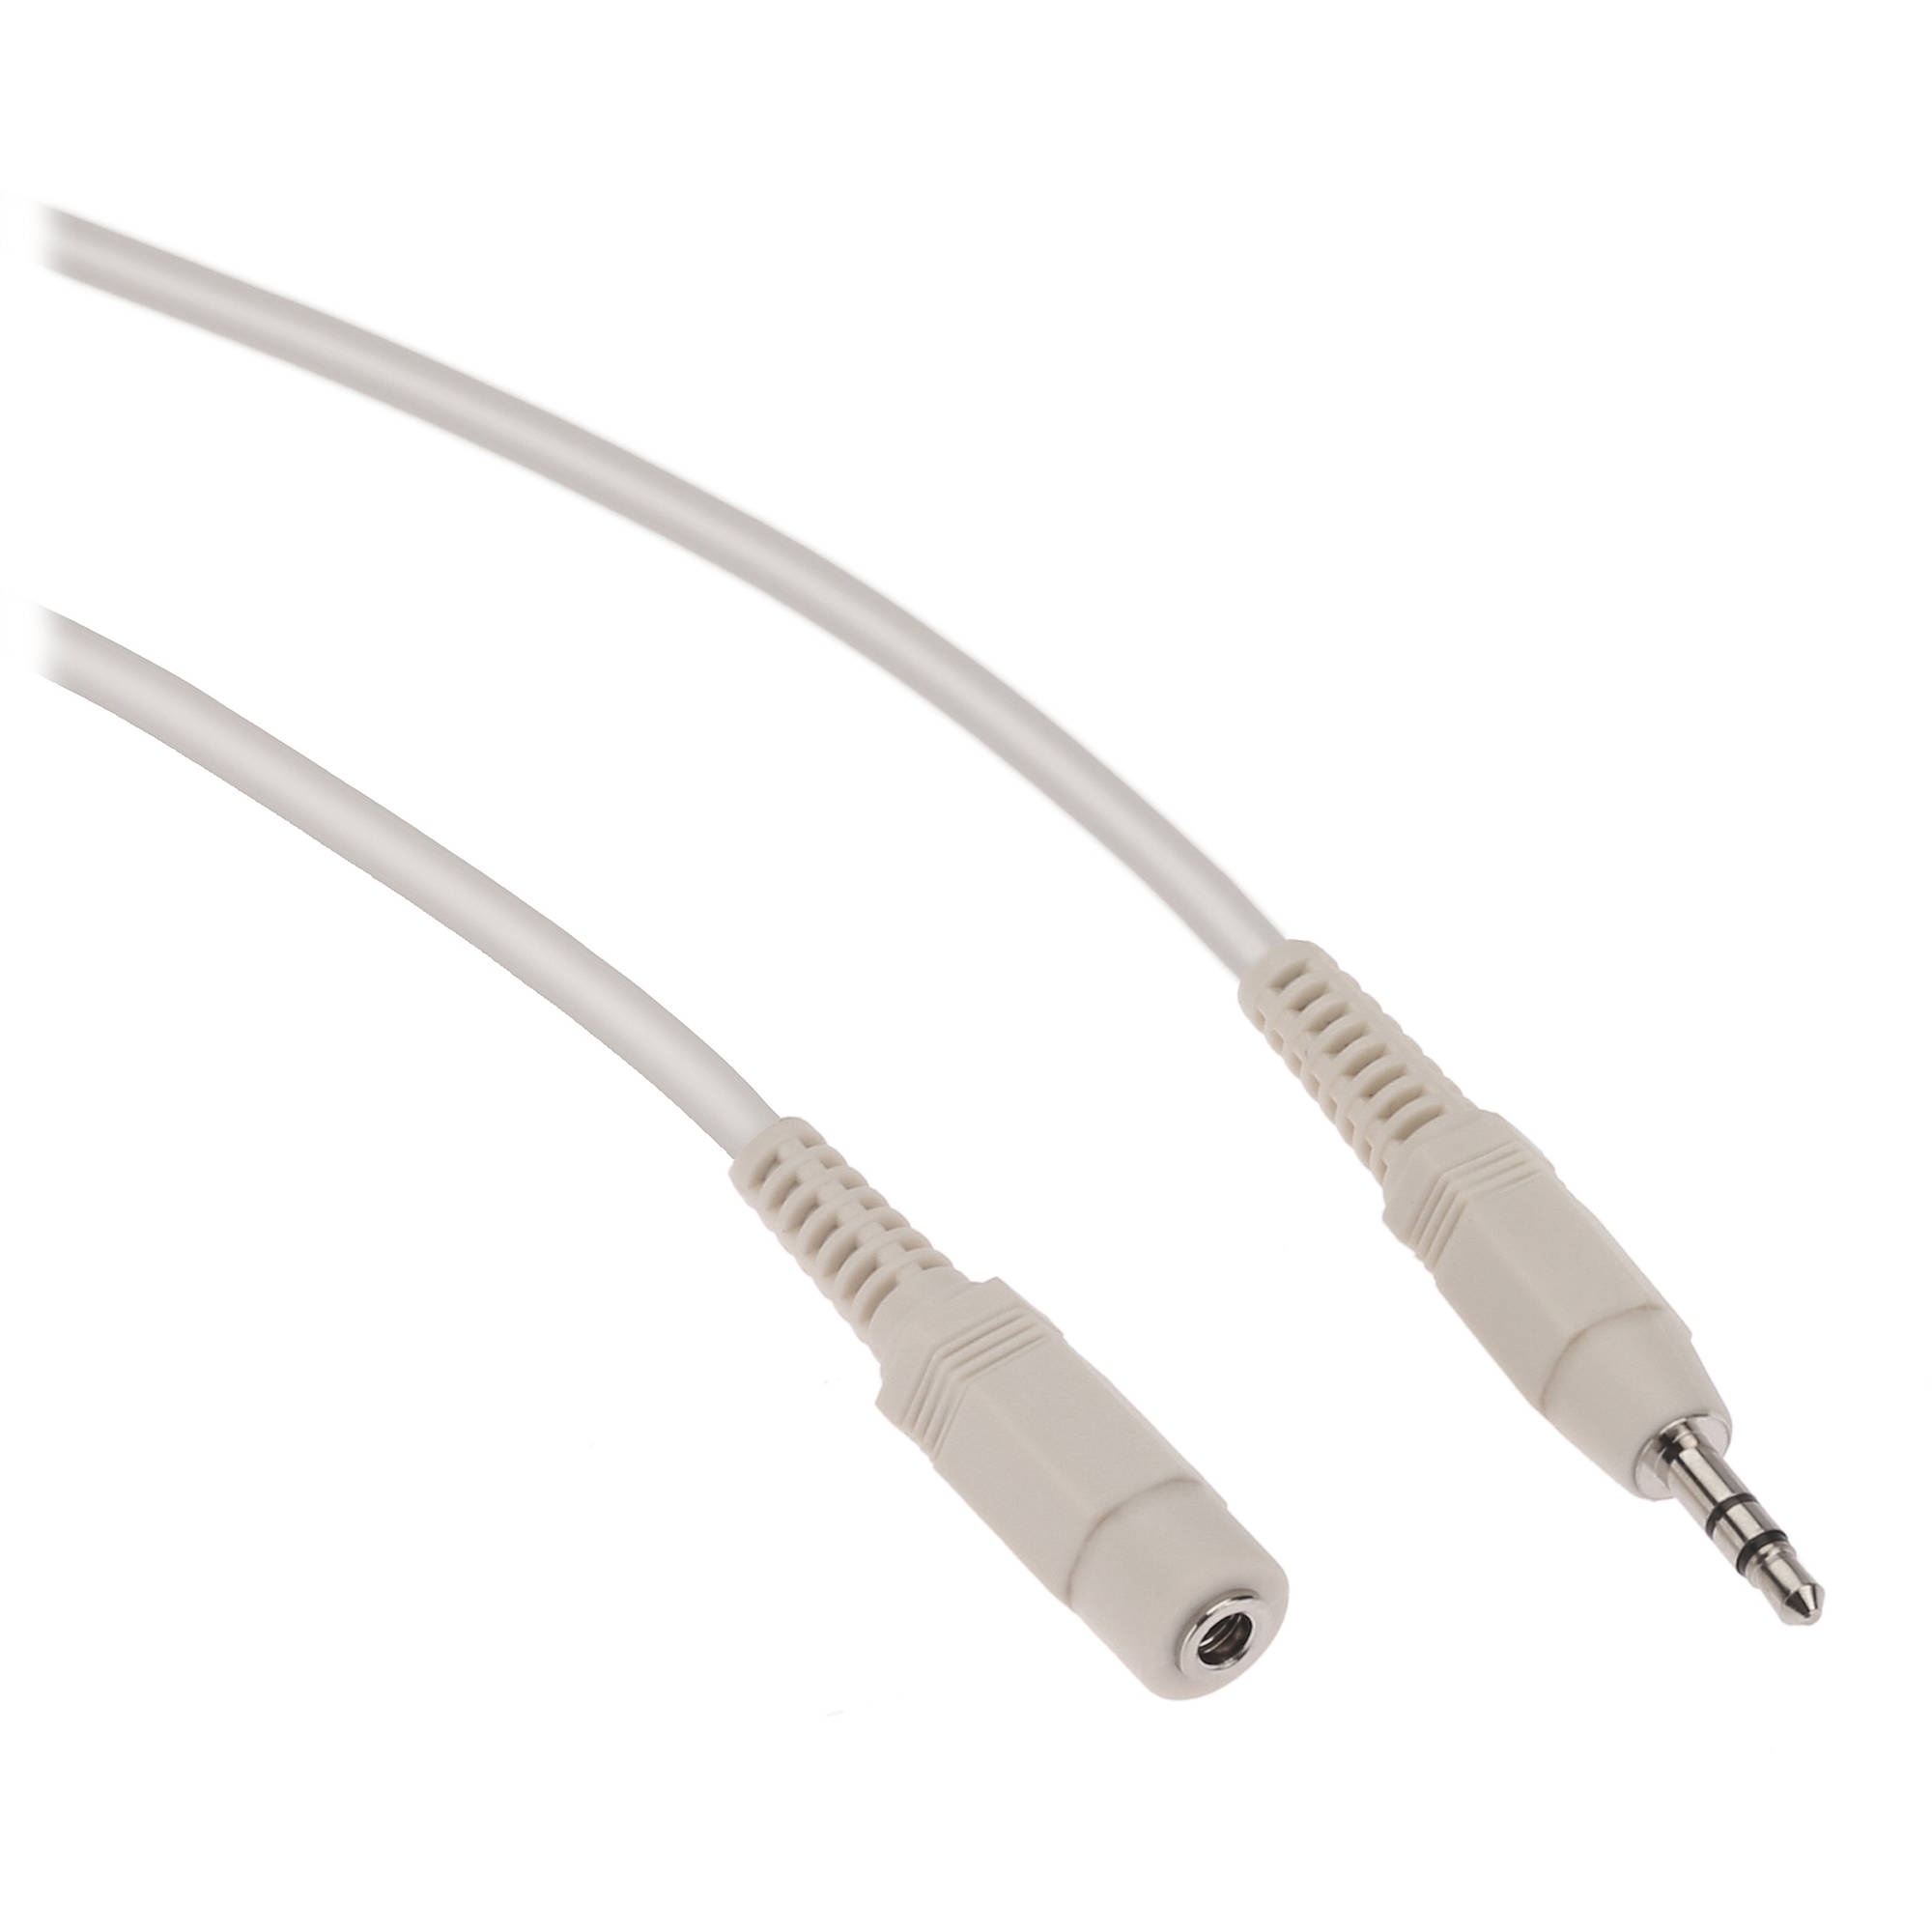 Pearstone Stereo Mini Male to Stereo Mini Female Extension Cable (White) - 25'